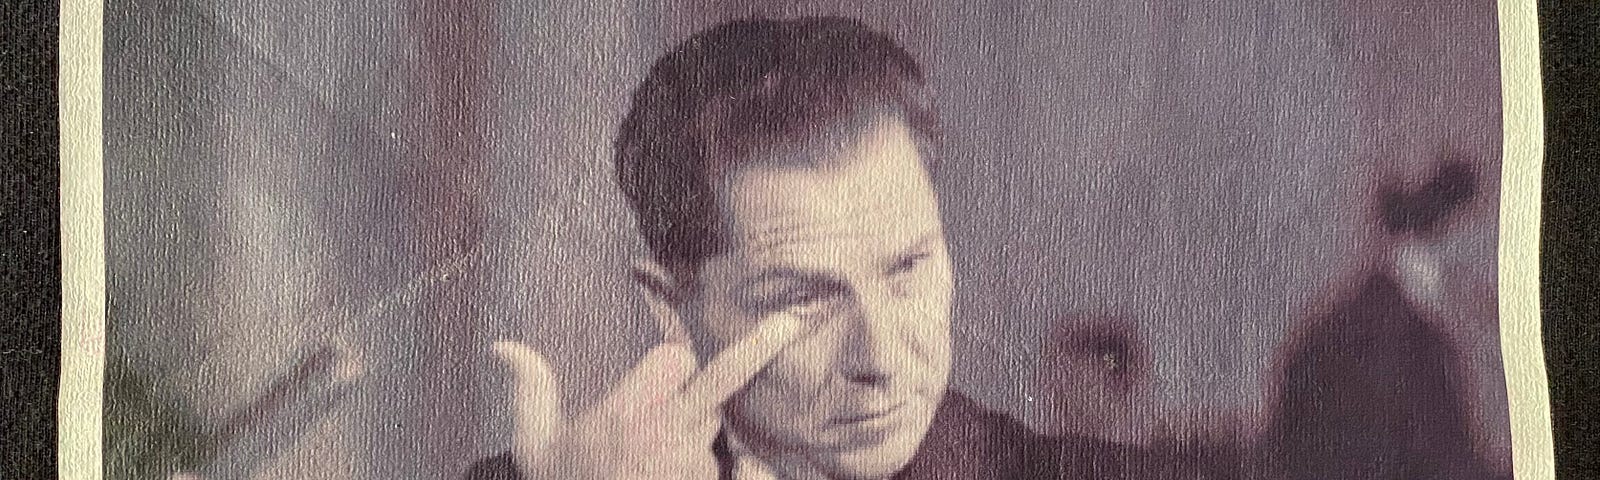 black & white image of Jimmy Hoffa holding up his middle finger printed on a t-shirt